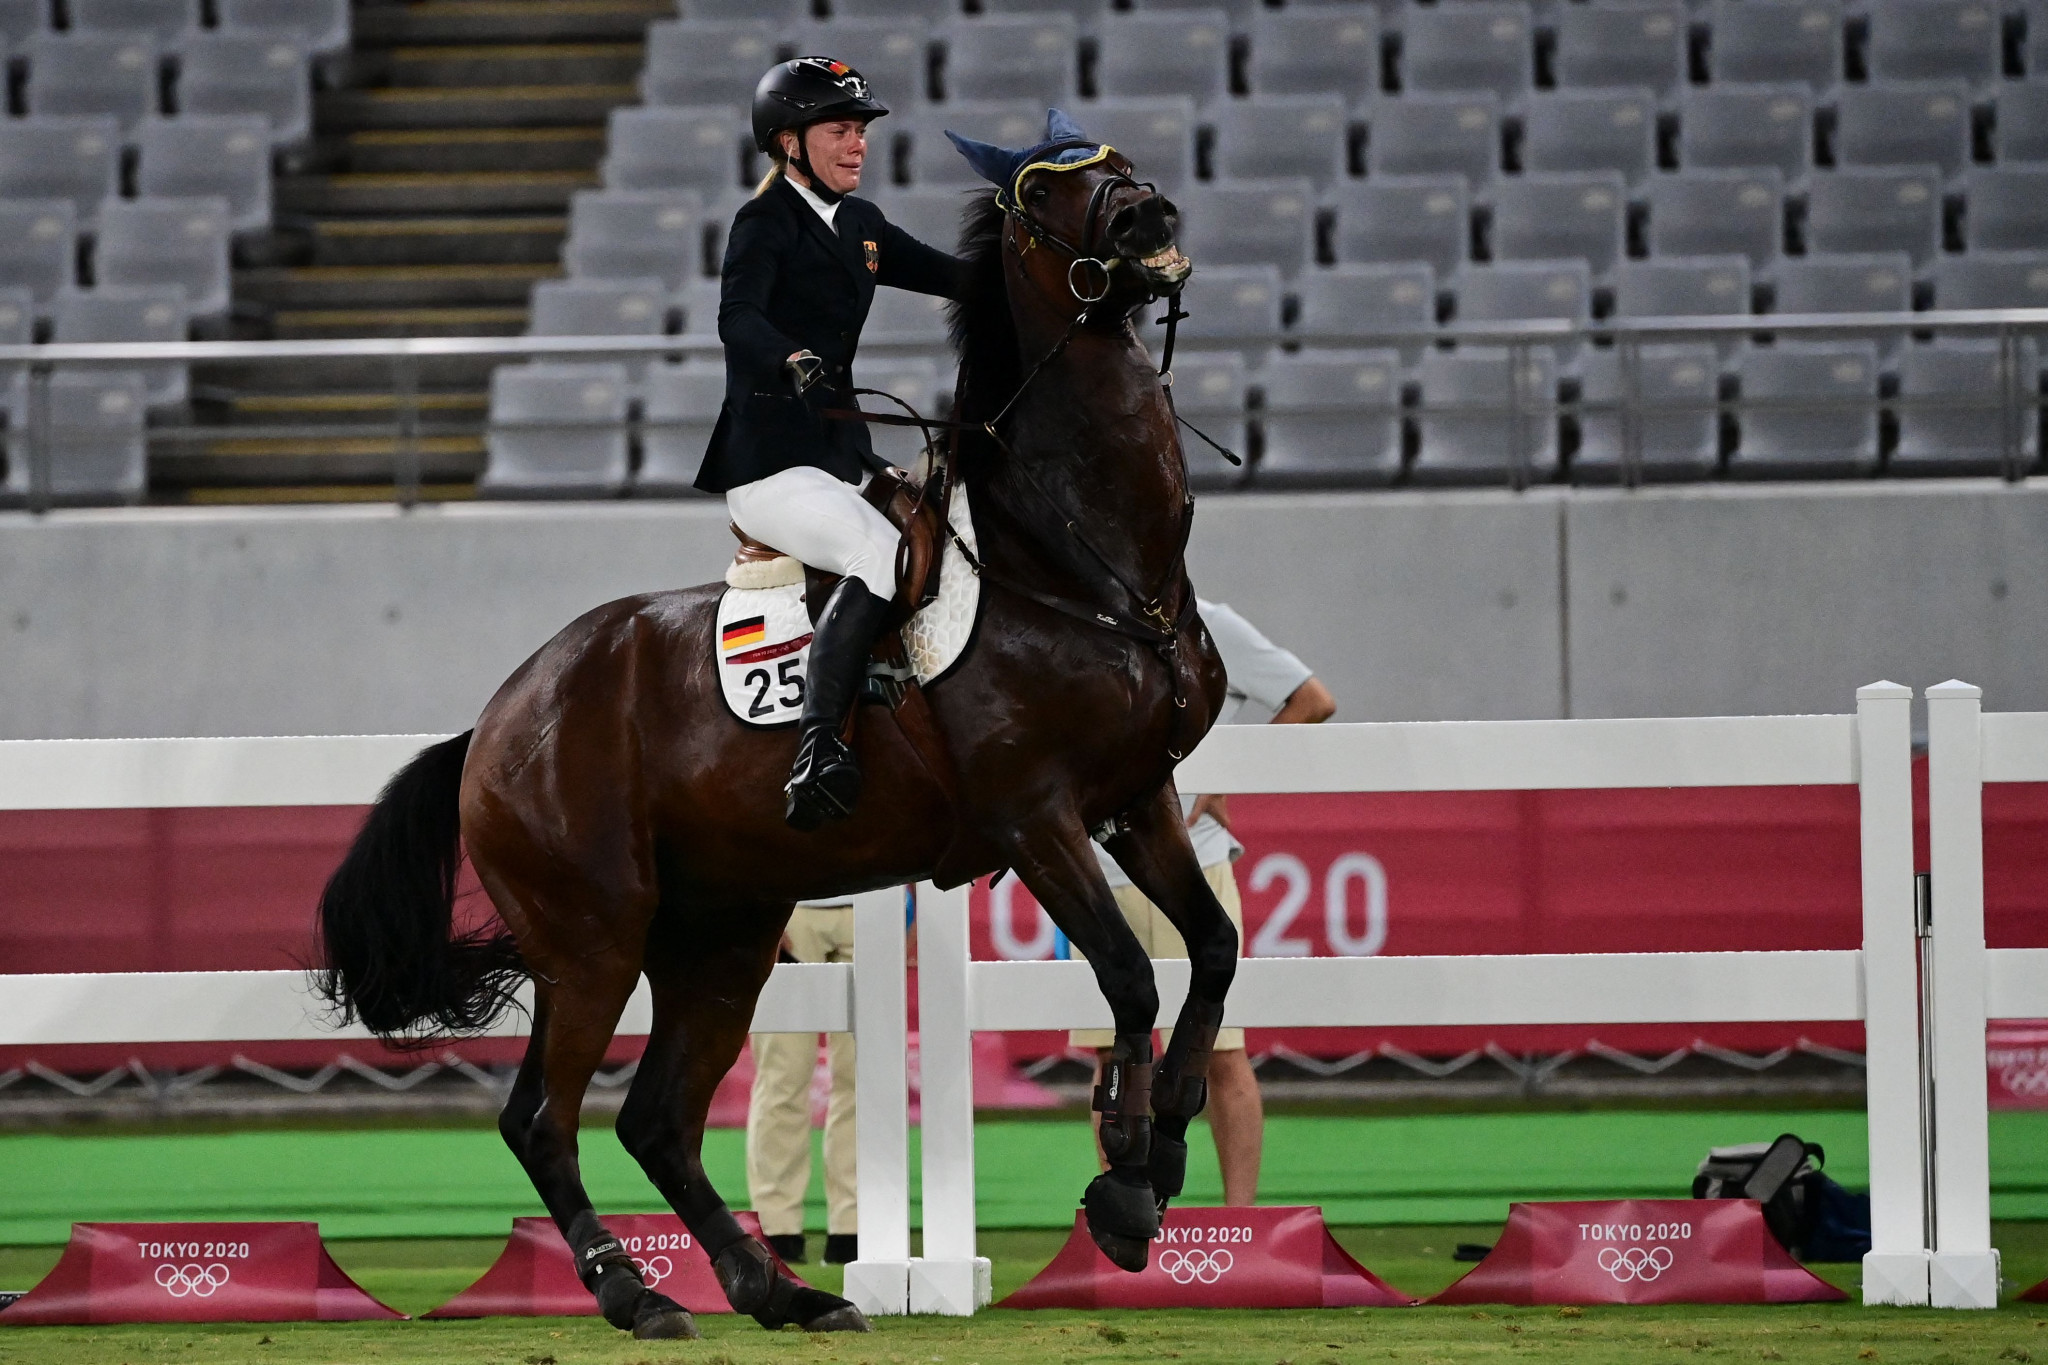 The debate on animals in sport was thrust into the spotlight following violence against horse Saint Boy at Tokyo 2020 ©Getty Images